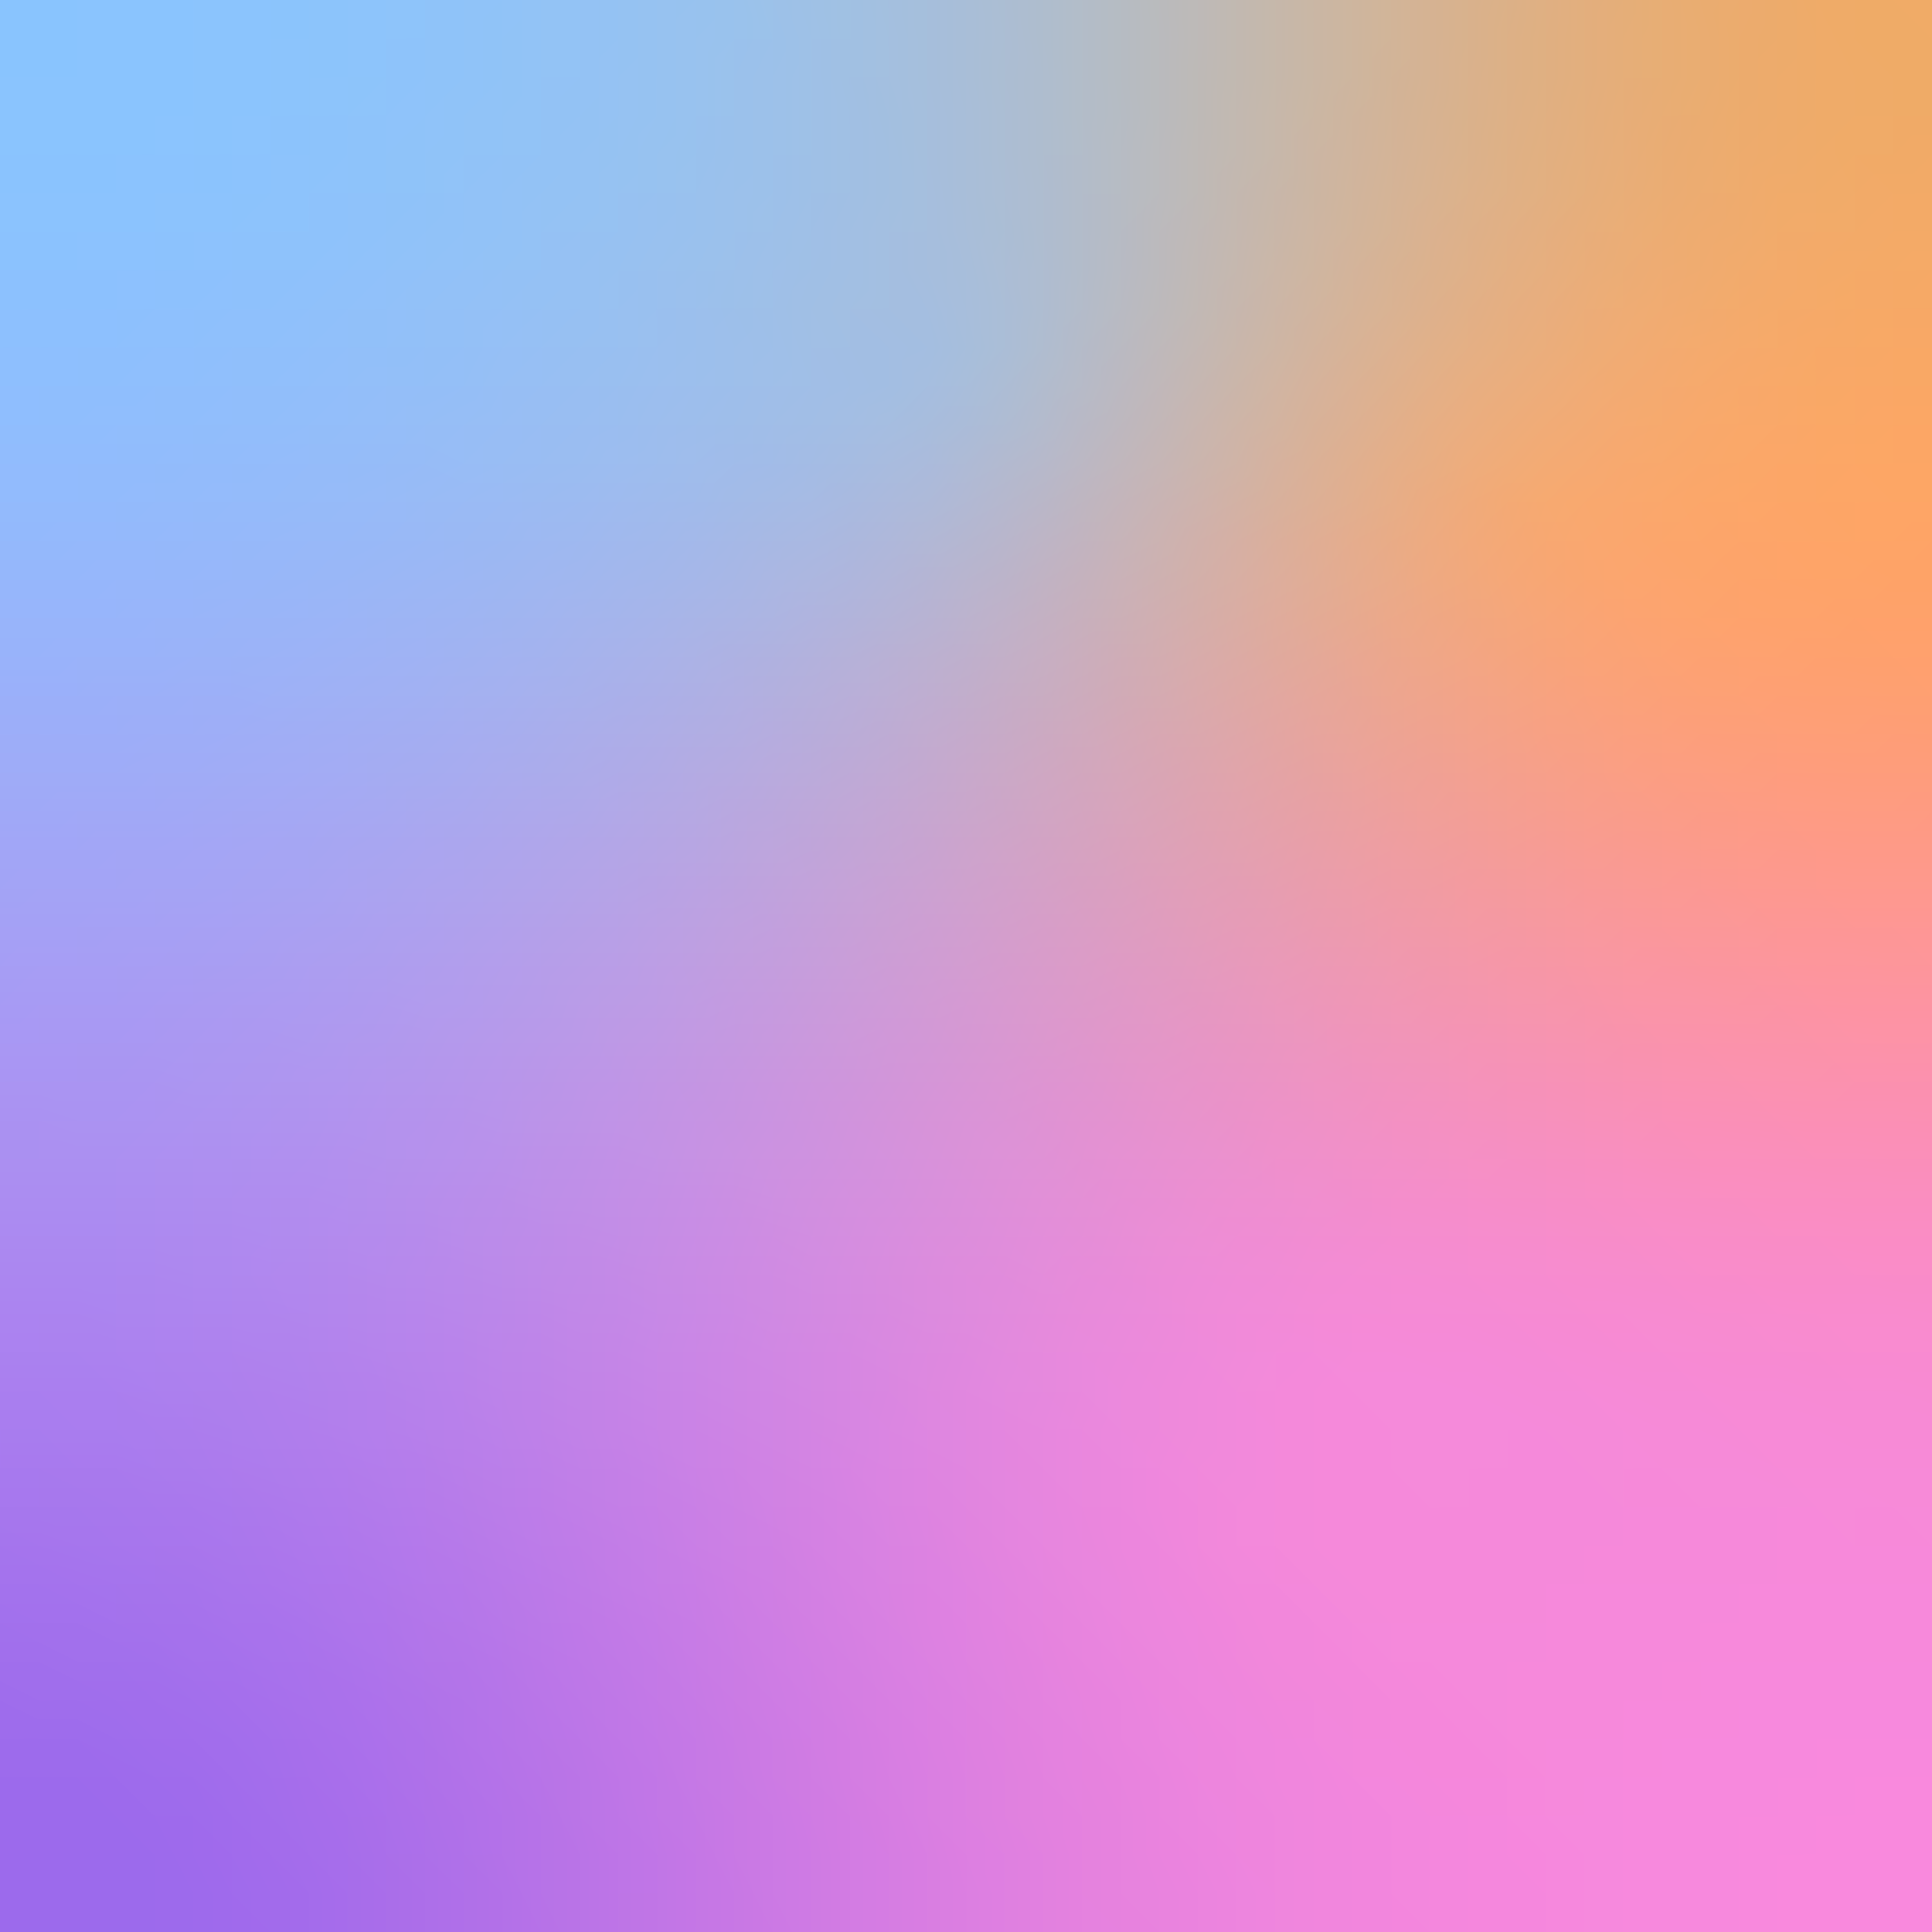 colorful blurred background with orange, blue and pink colors